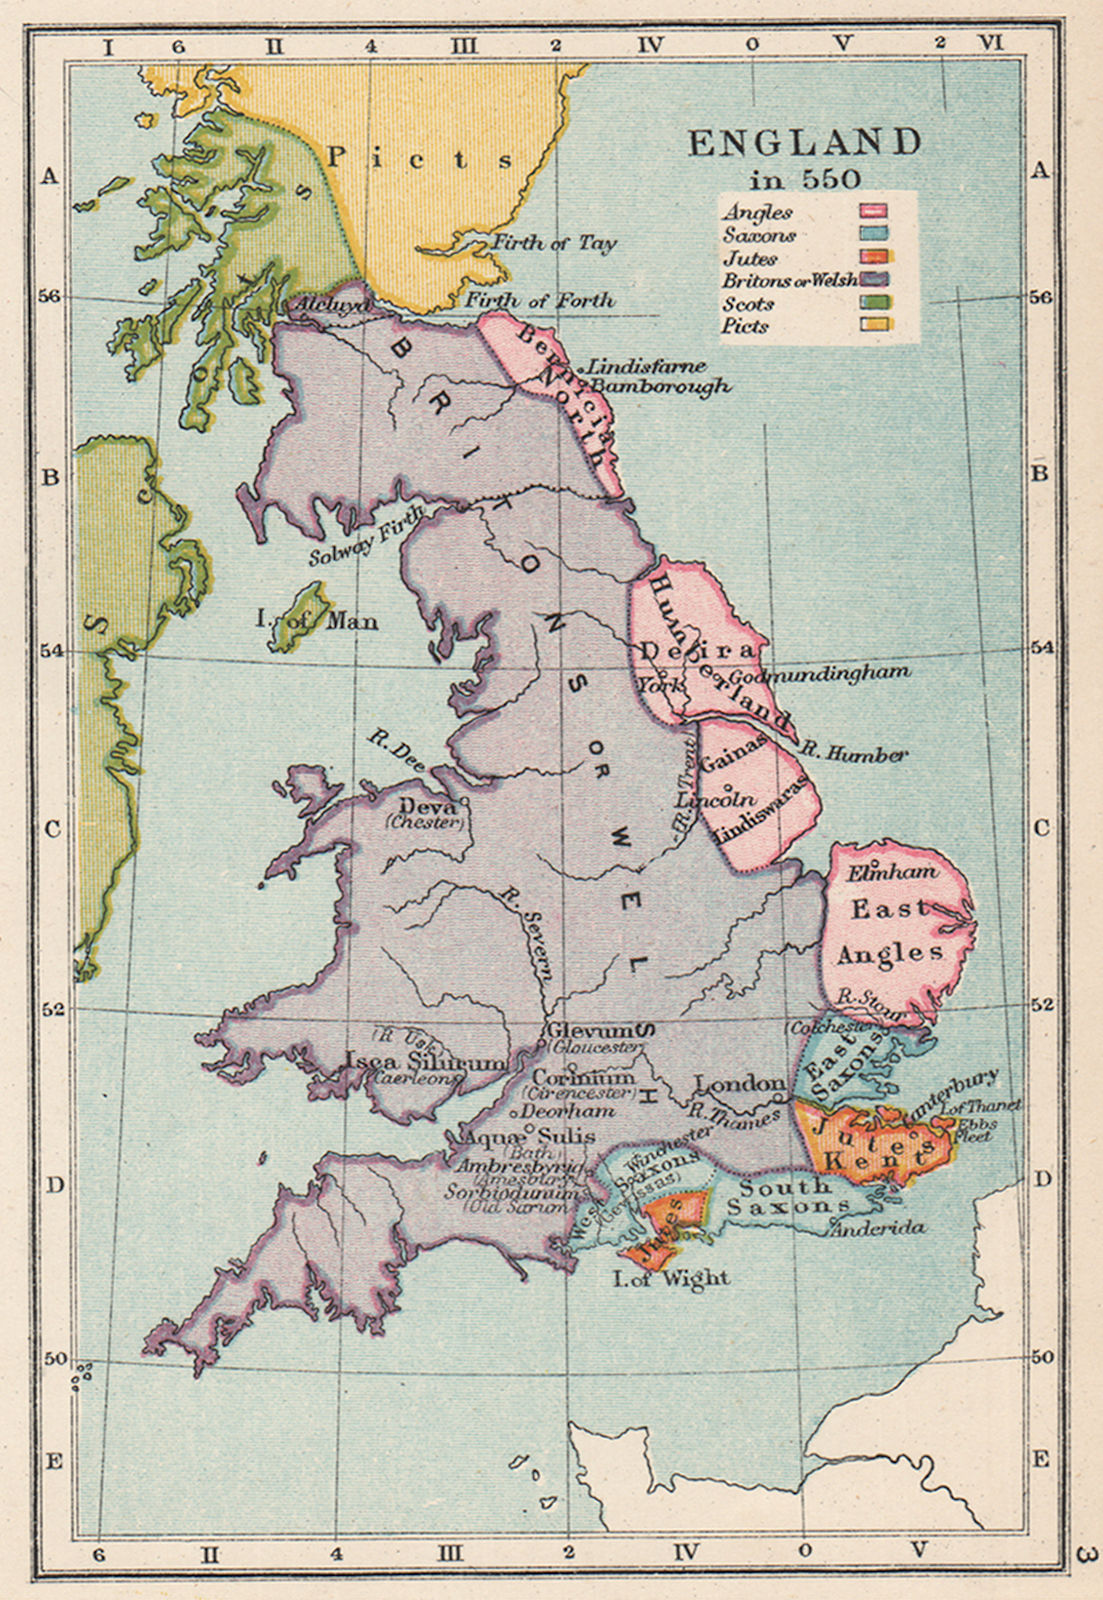 ENGLAND IN 550. Ethnic. Britons Angles Saxons Jutes Picts Scots. SMALL 1907 map